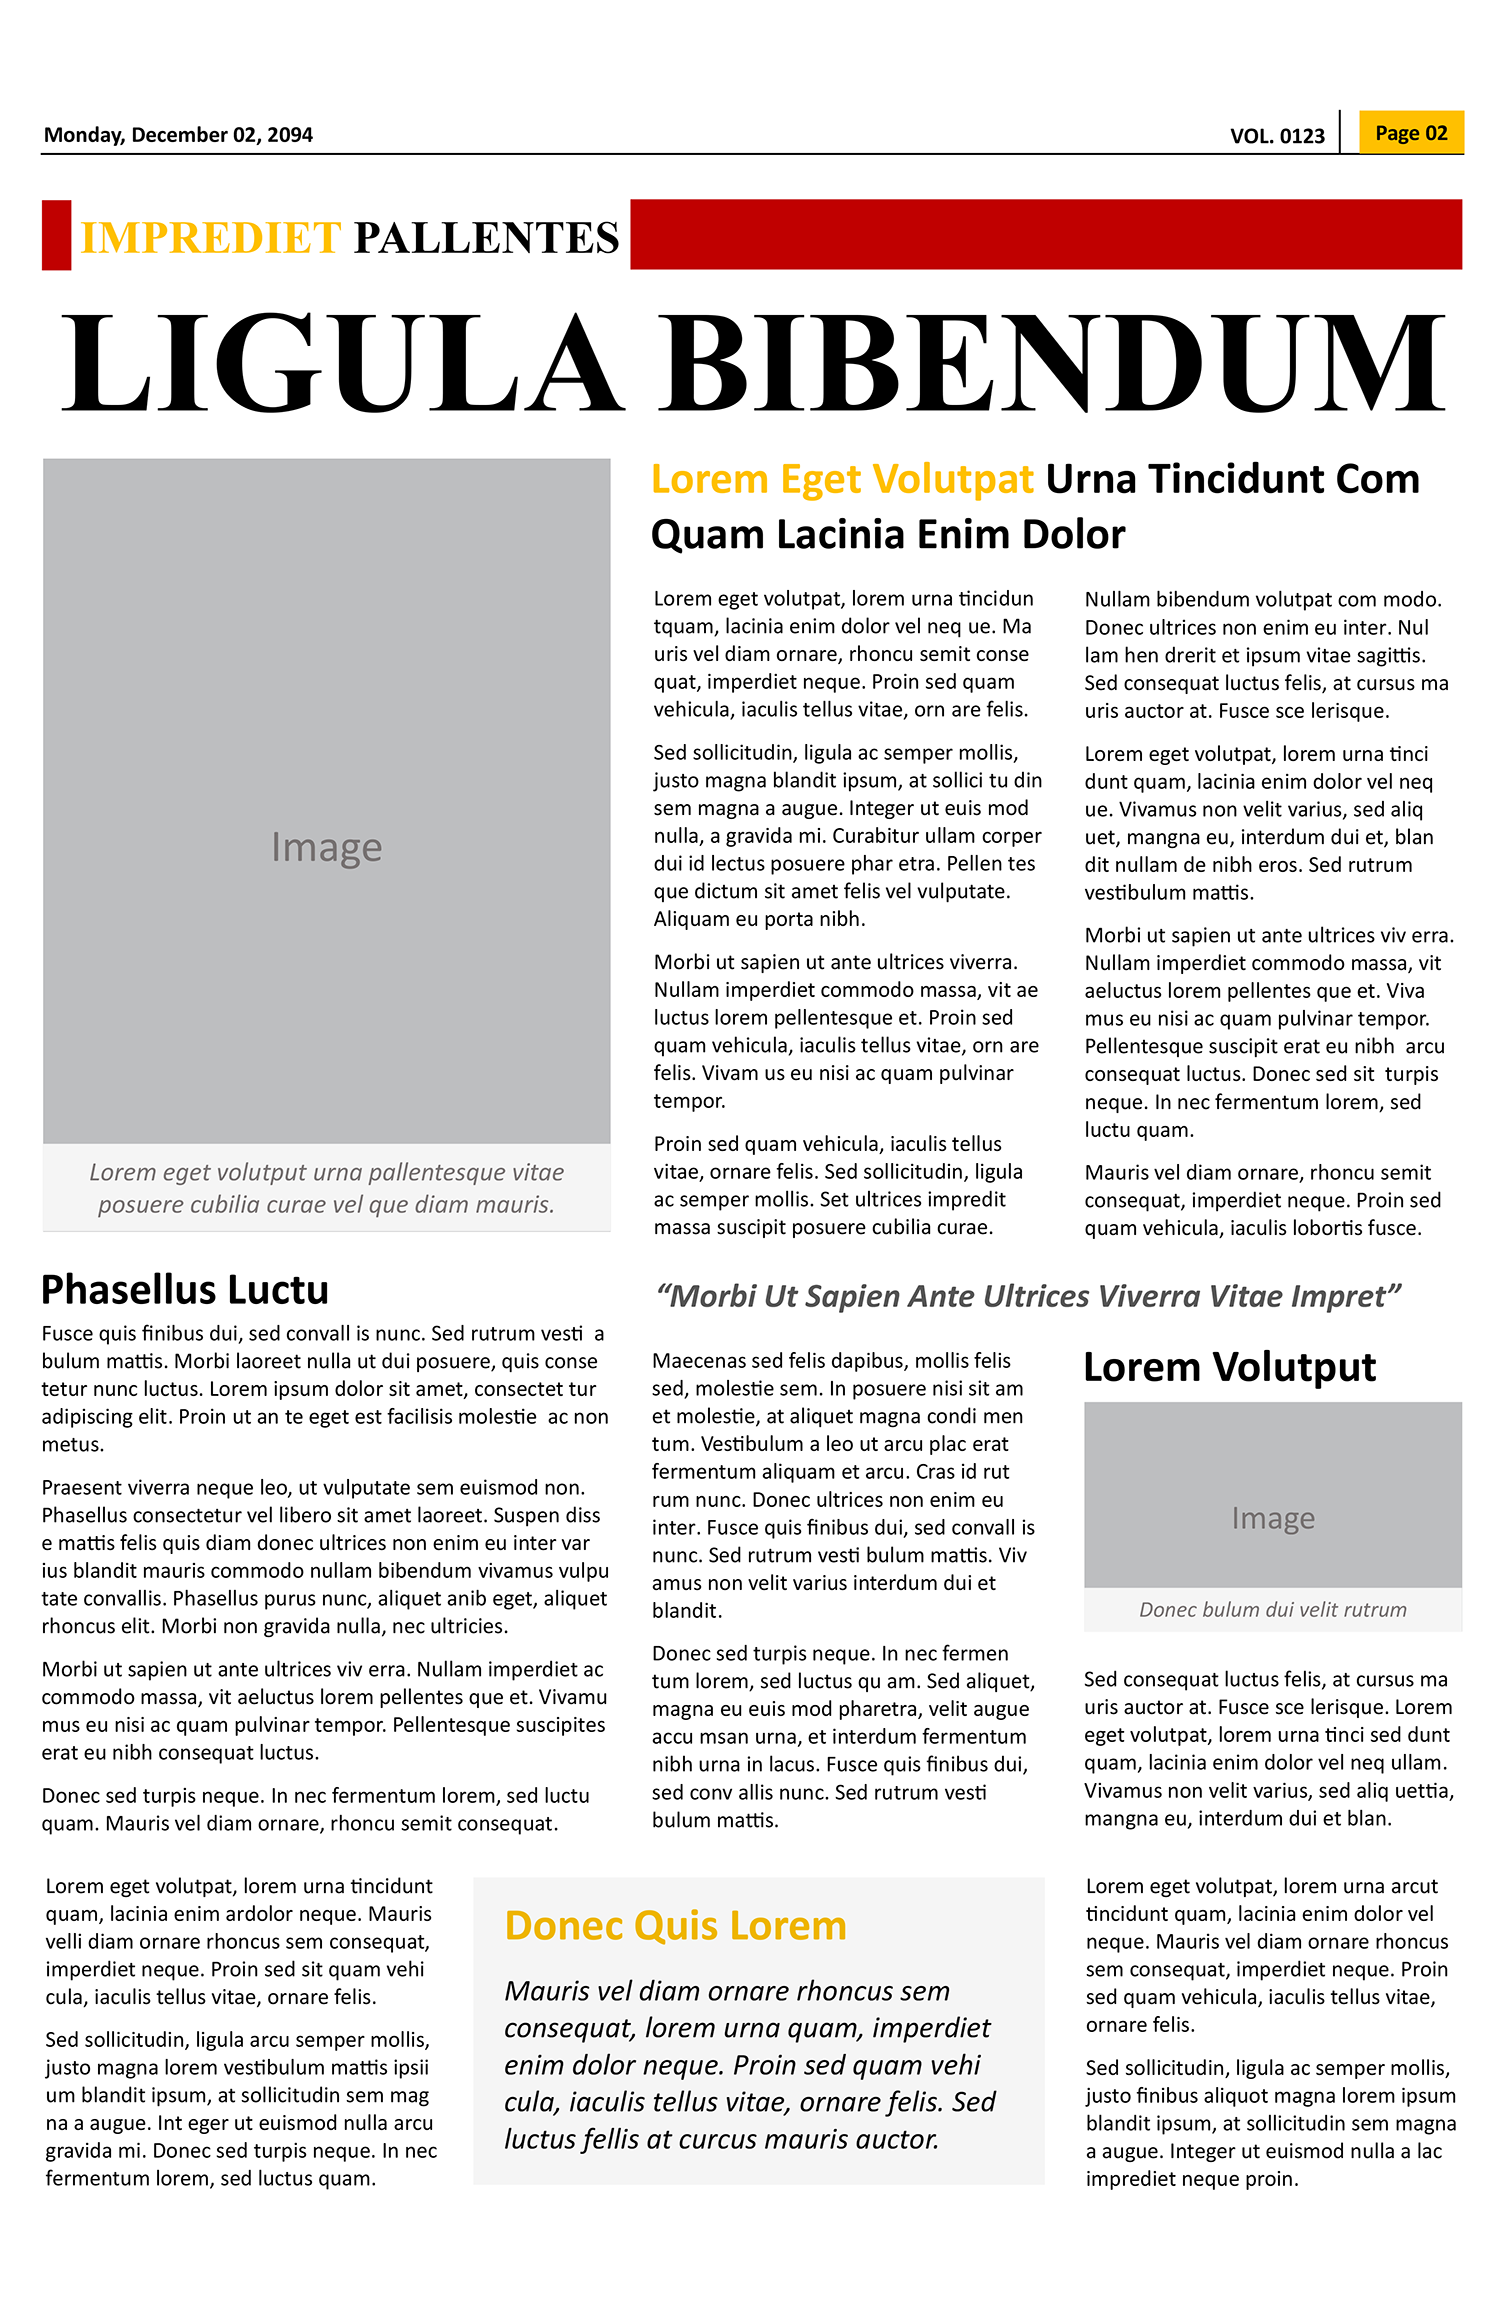 Red And Yellow Tabloid Newspaper Front Page Template - Page 02